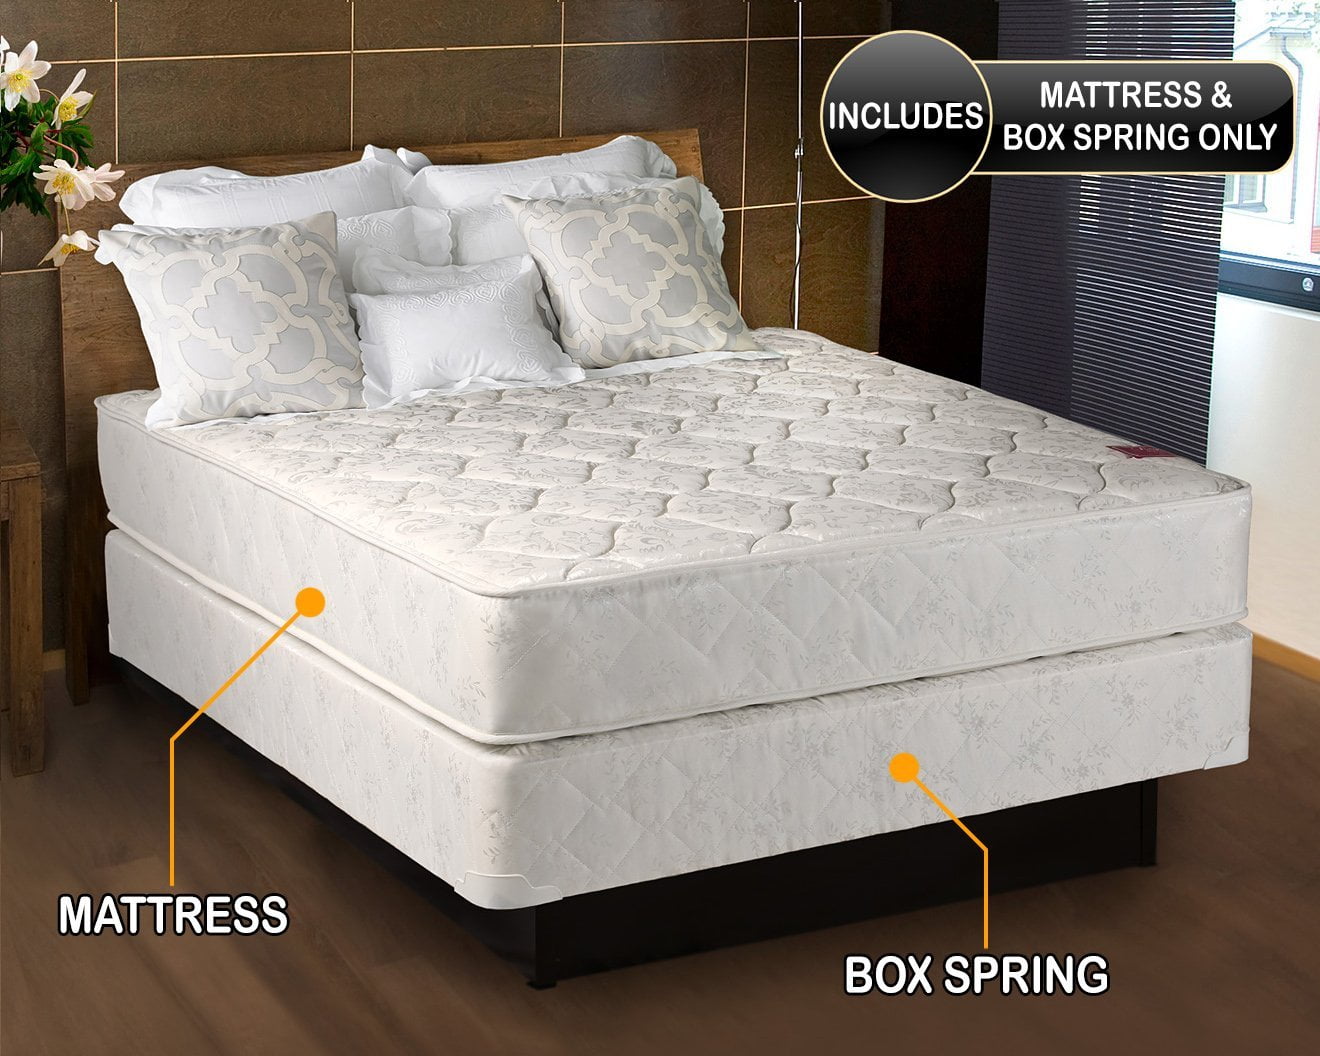 QUEEN Size Mattress 10 Inch Pillow Top Bedroom Spring Support Pain Relief Bed 